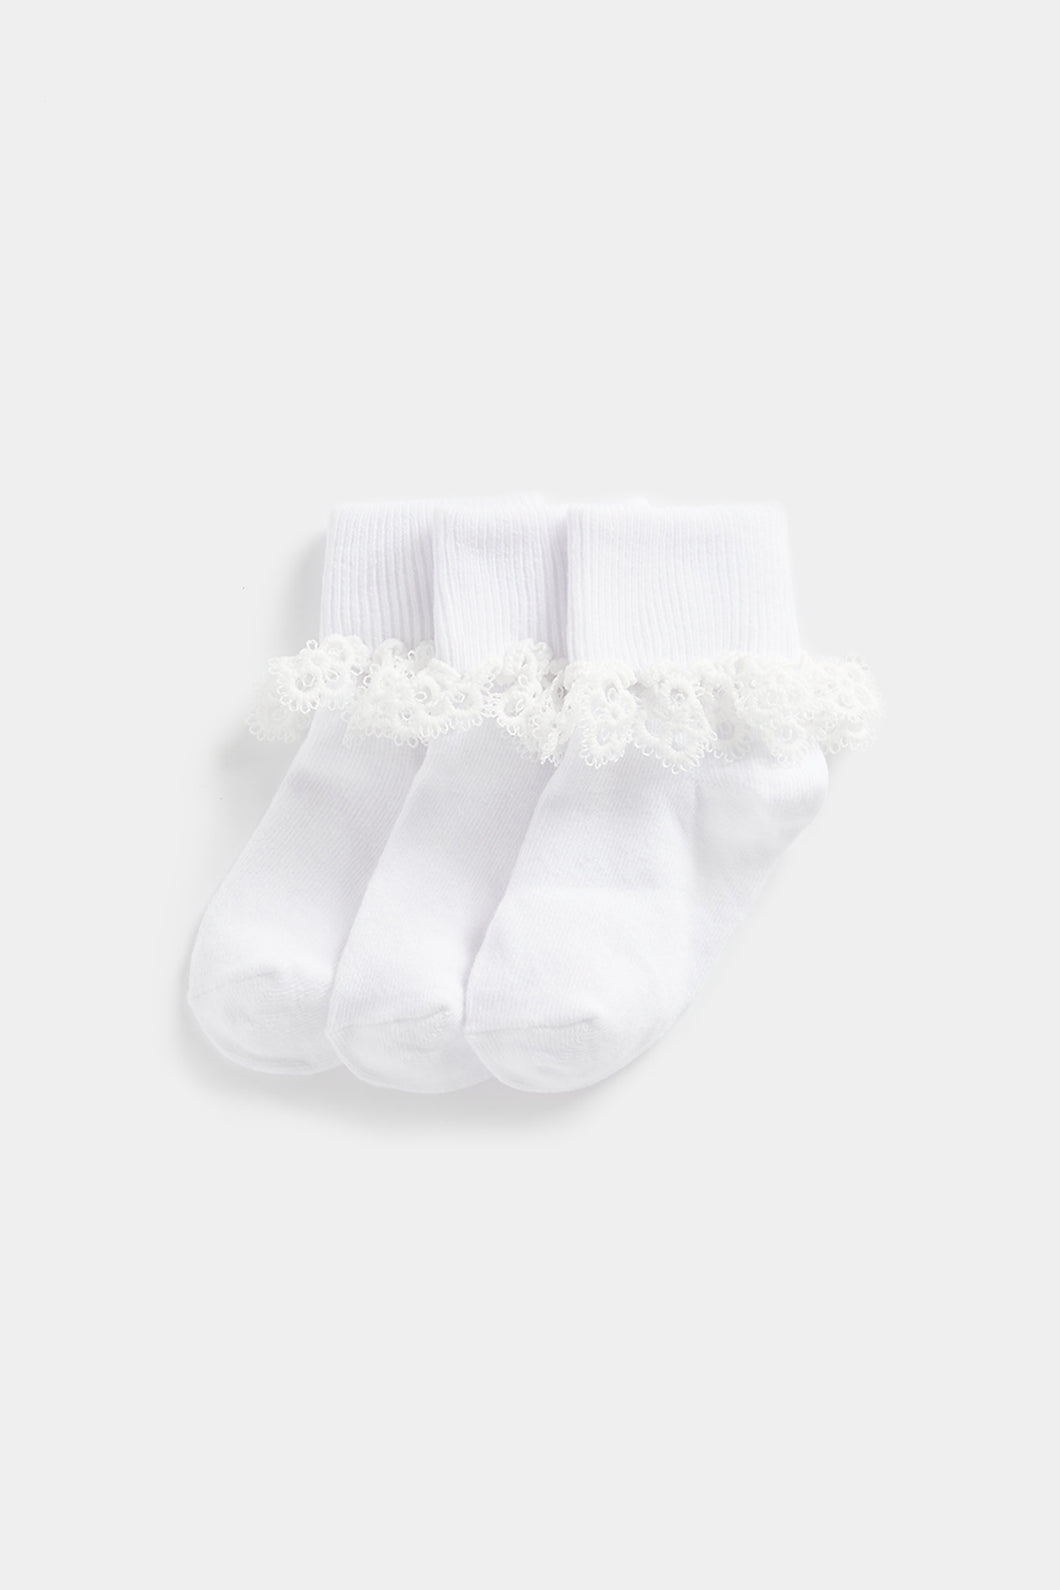 Mothercare White Lace Turn-Over-Top Socks - 3 Pack